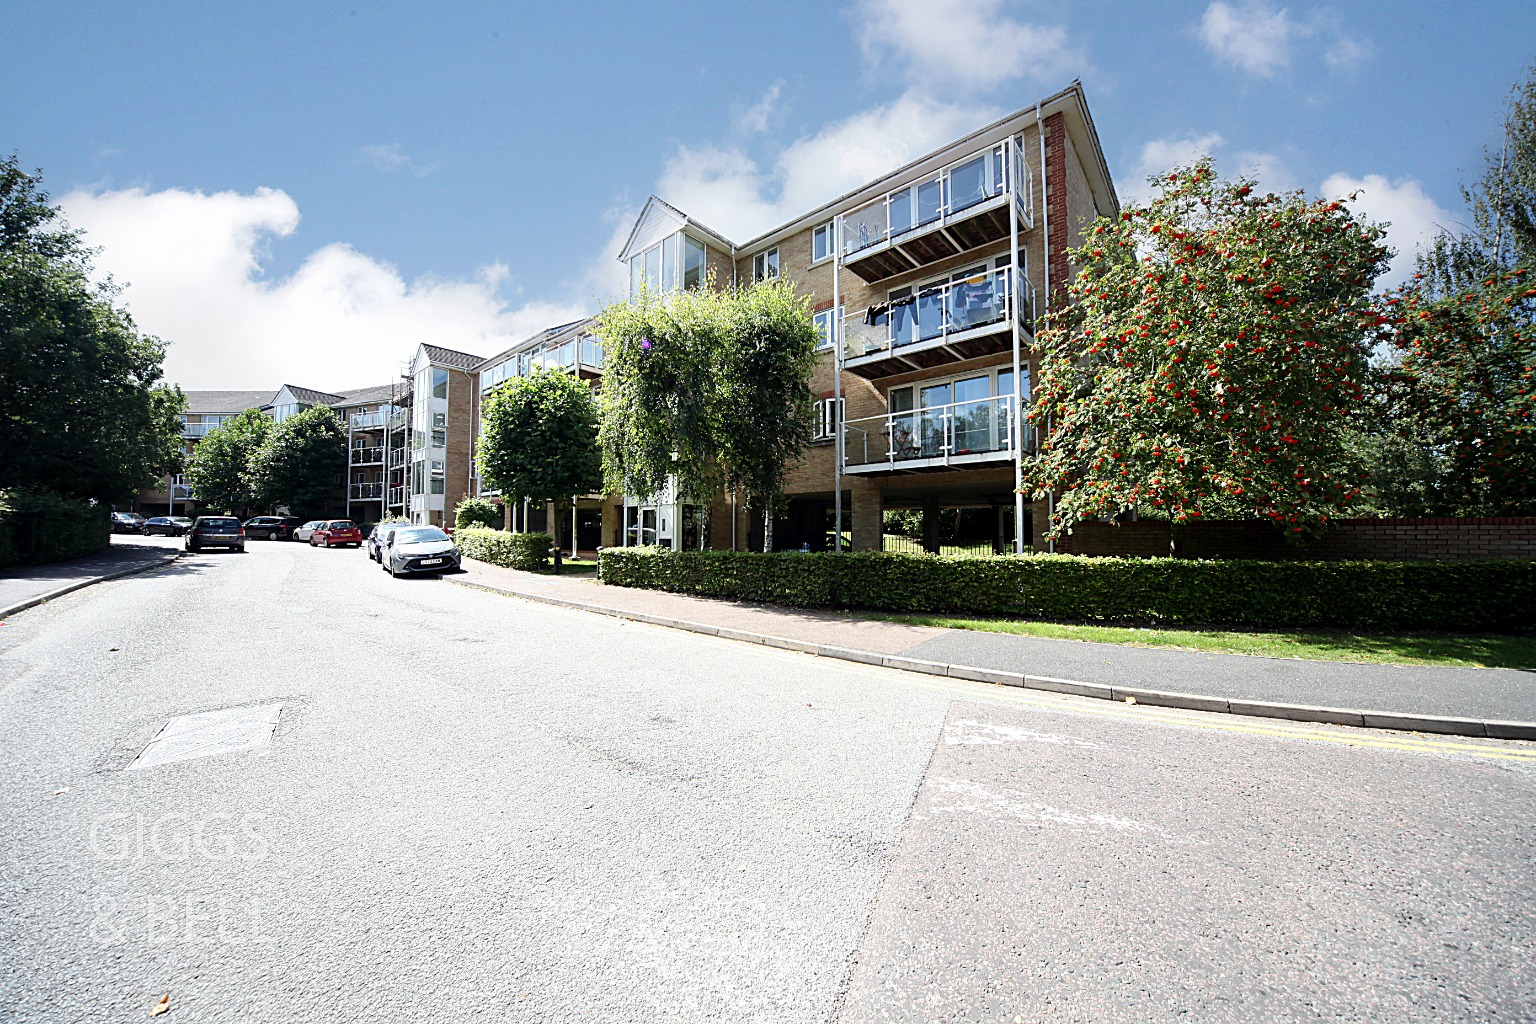 2 bed flat for sale in Foxglove Way, Luton - Property Image 1